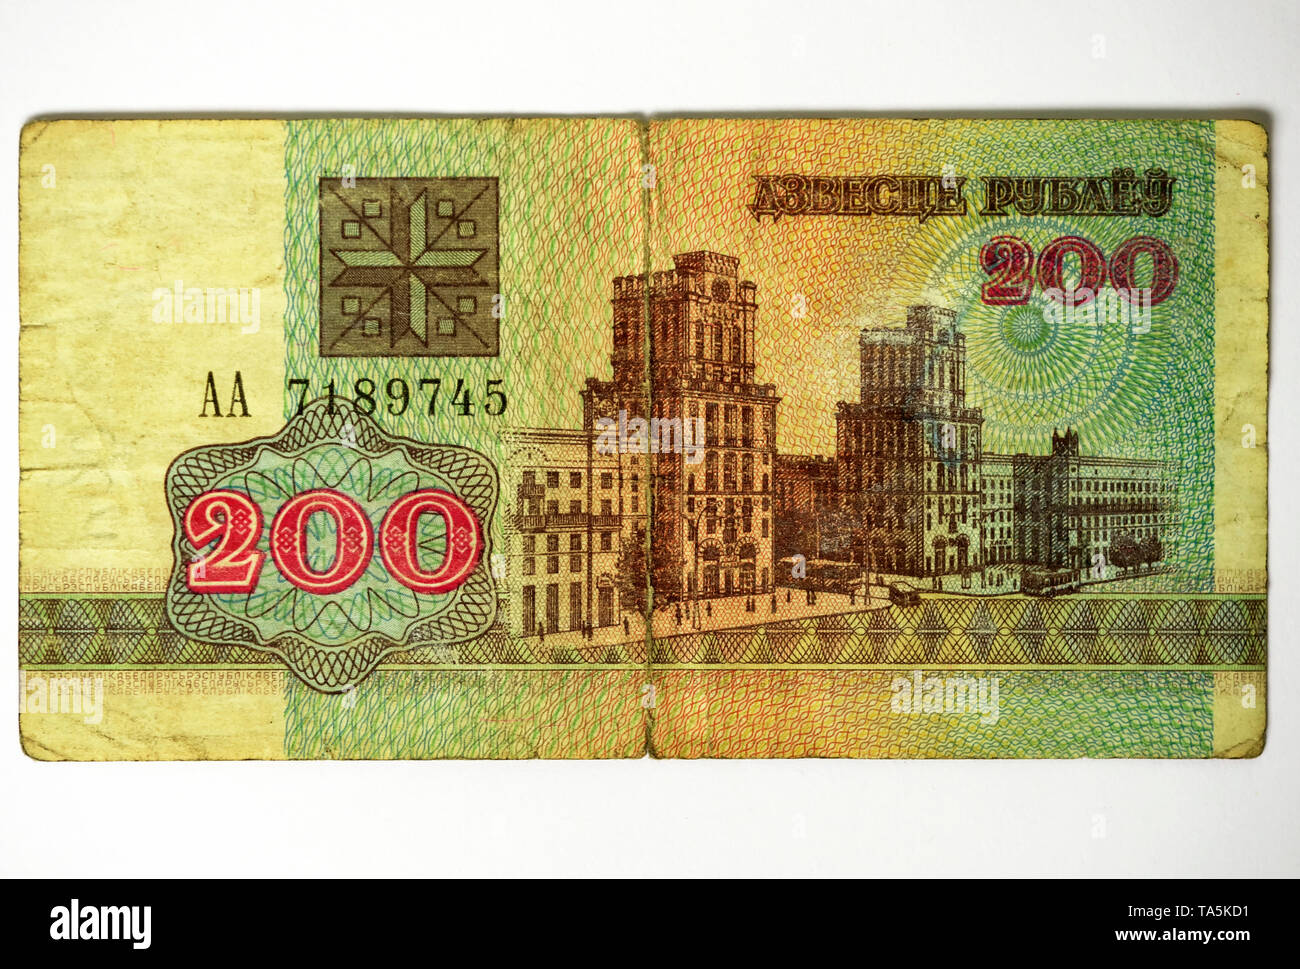 Treasury card of the National Bank of Belarus worth two hundred rubles, second-hand, paper money close-up Stock Photo